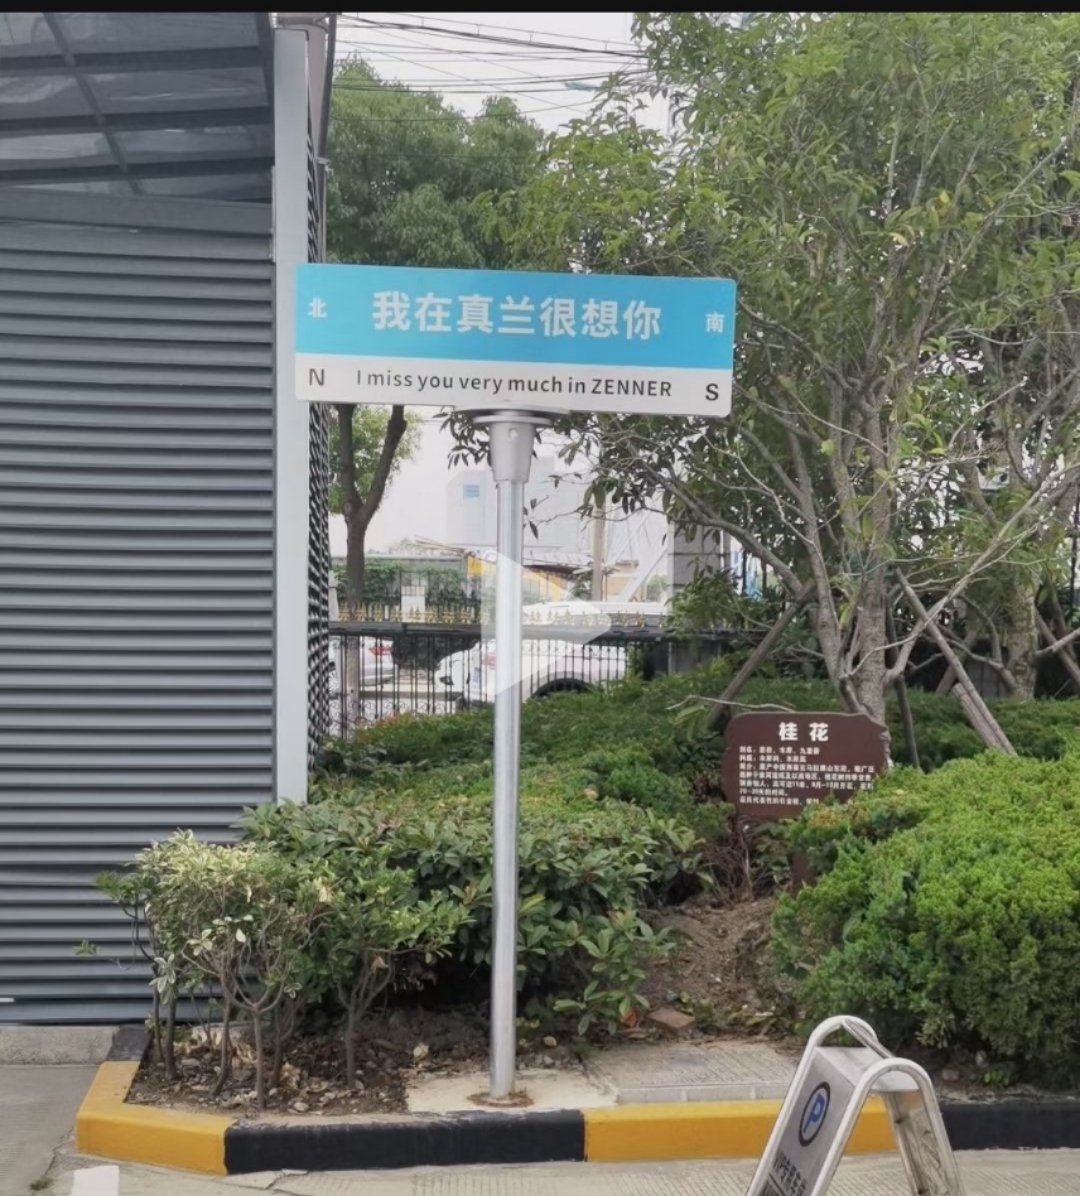 Shanghai Zenner metering Professional on Providing Gas solutions, manufacturing gas meters,flow meters and gas hoses. 'I miss you very much in ZENNER'